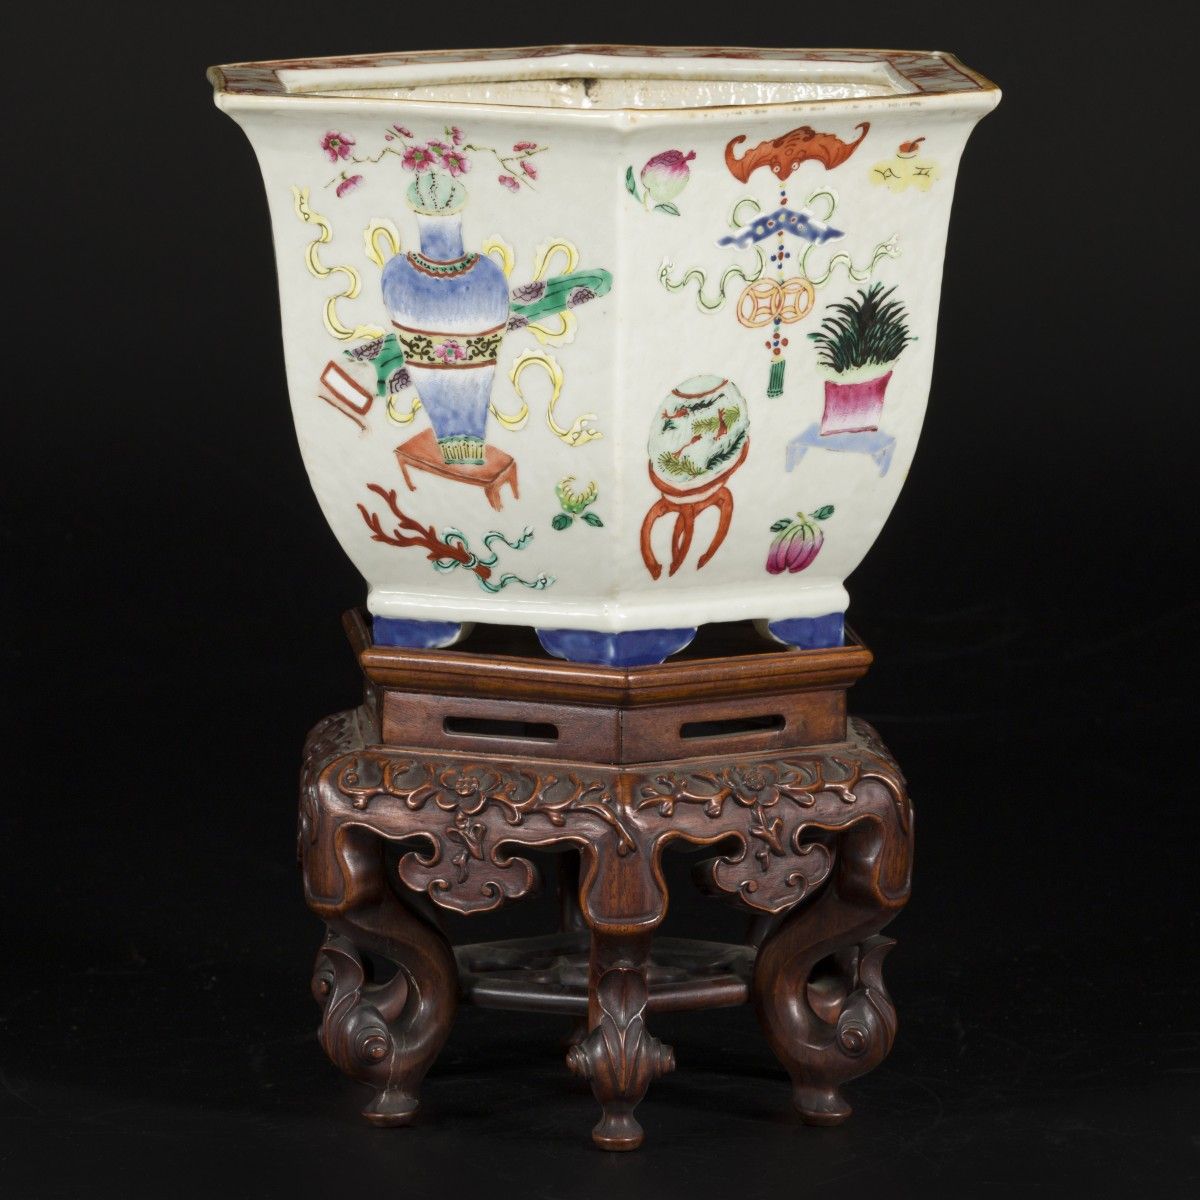 A porcelain cachepot florally decorated with antiques on a wooden base, China, 2&hellip;